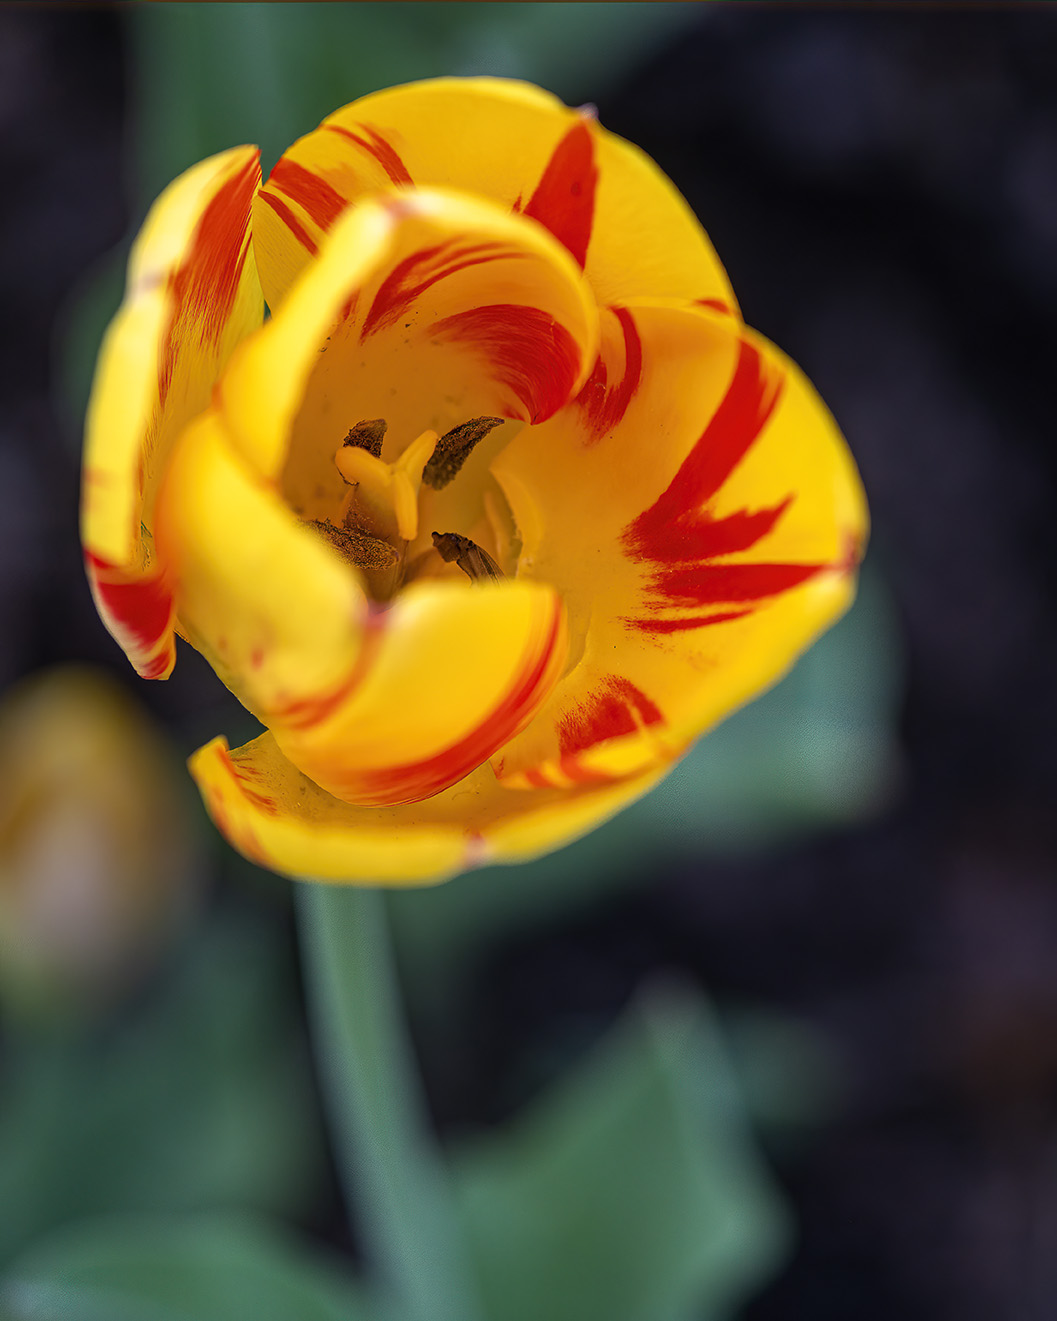 Olympic Flame Tulip by Rich Sears